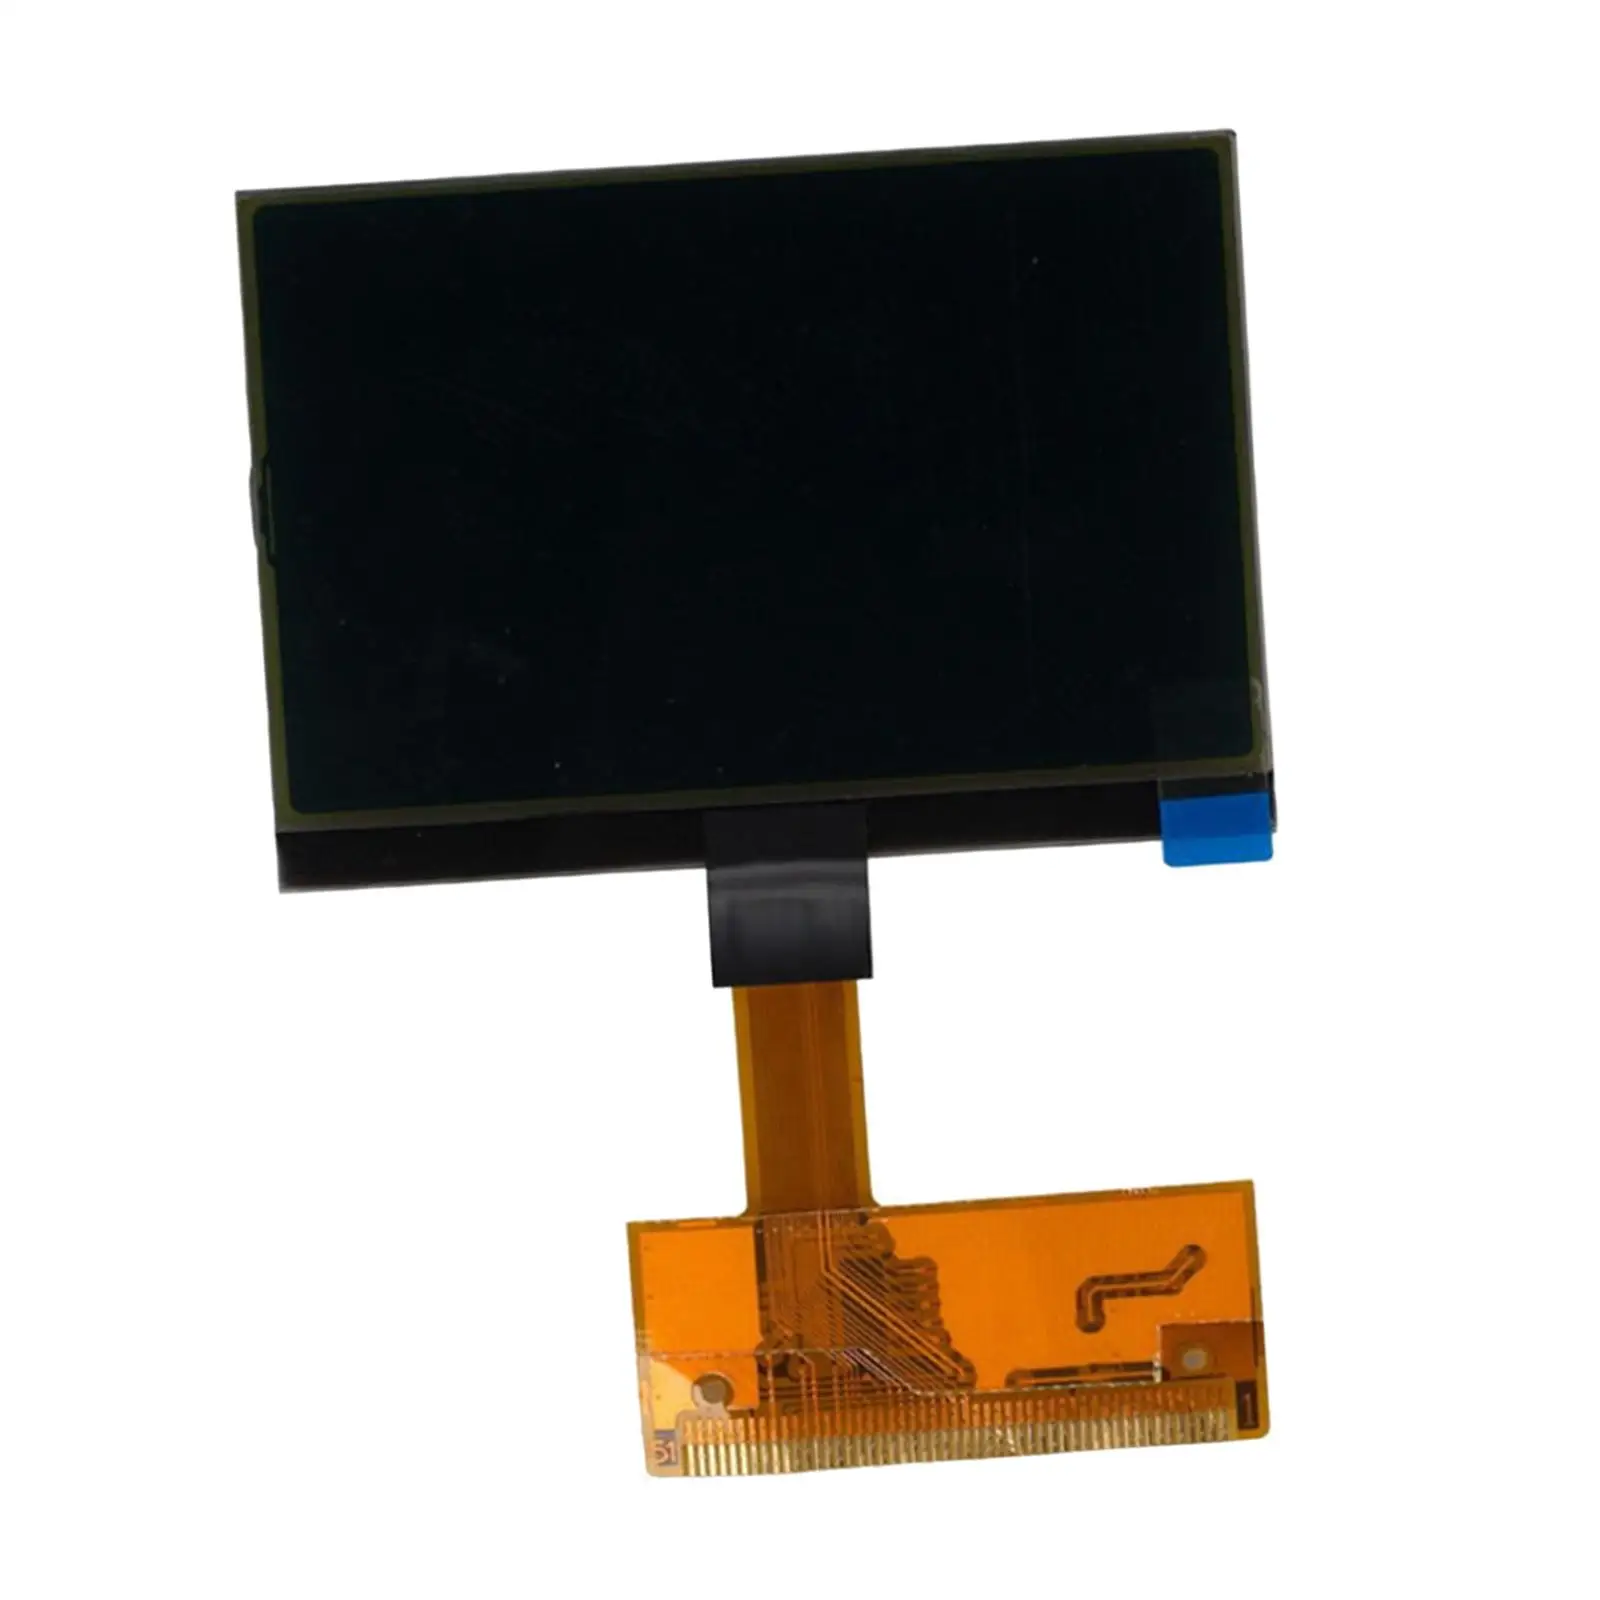 LCD Display Screen 15 inch Monitor Display Dashboard Repair   8N 9-06 Vehicle Parts Replace Durable Accessories